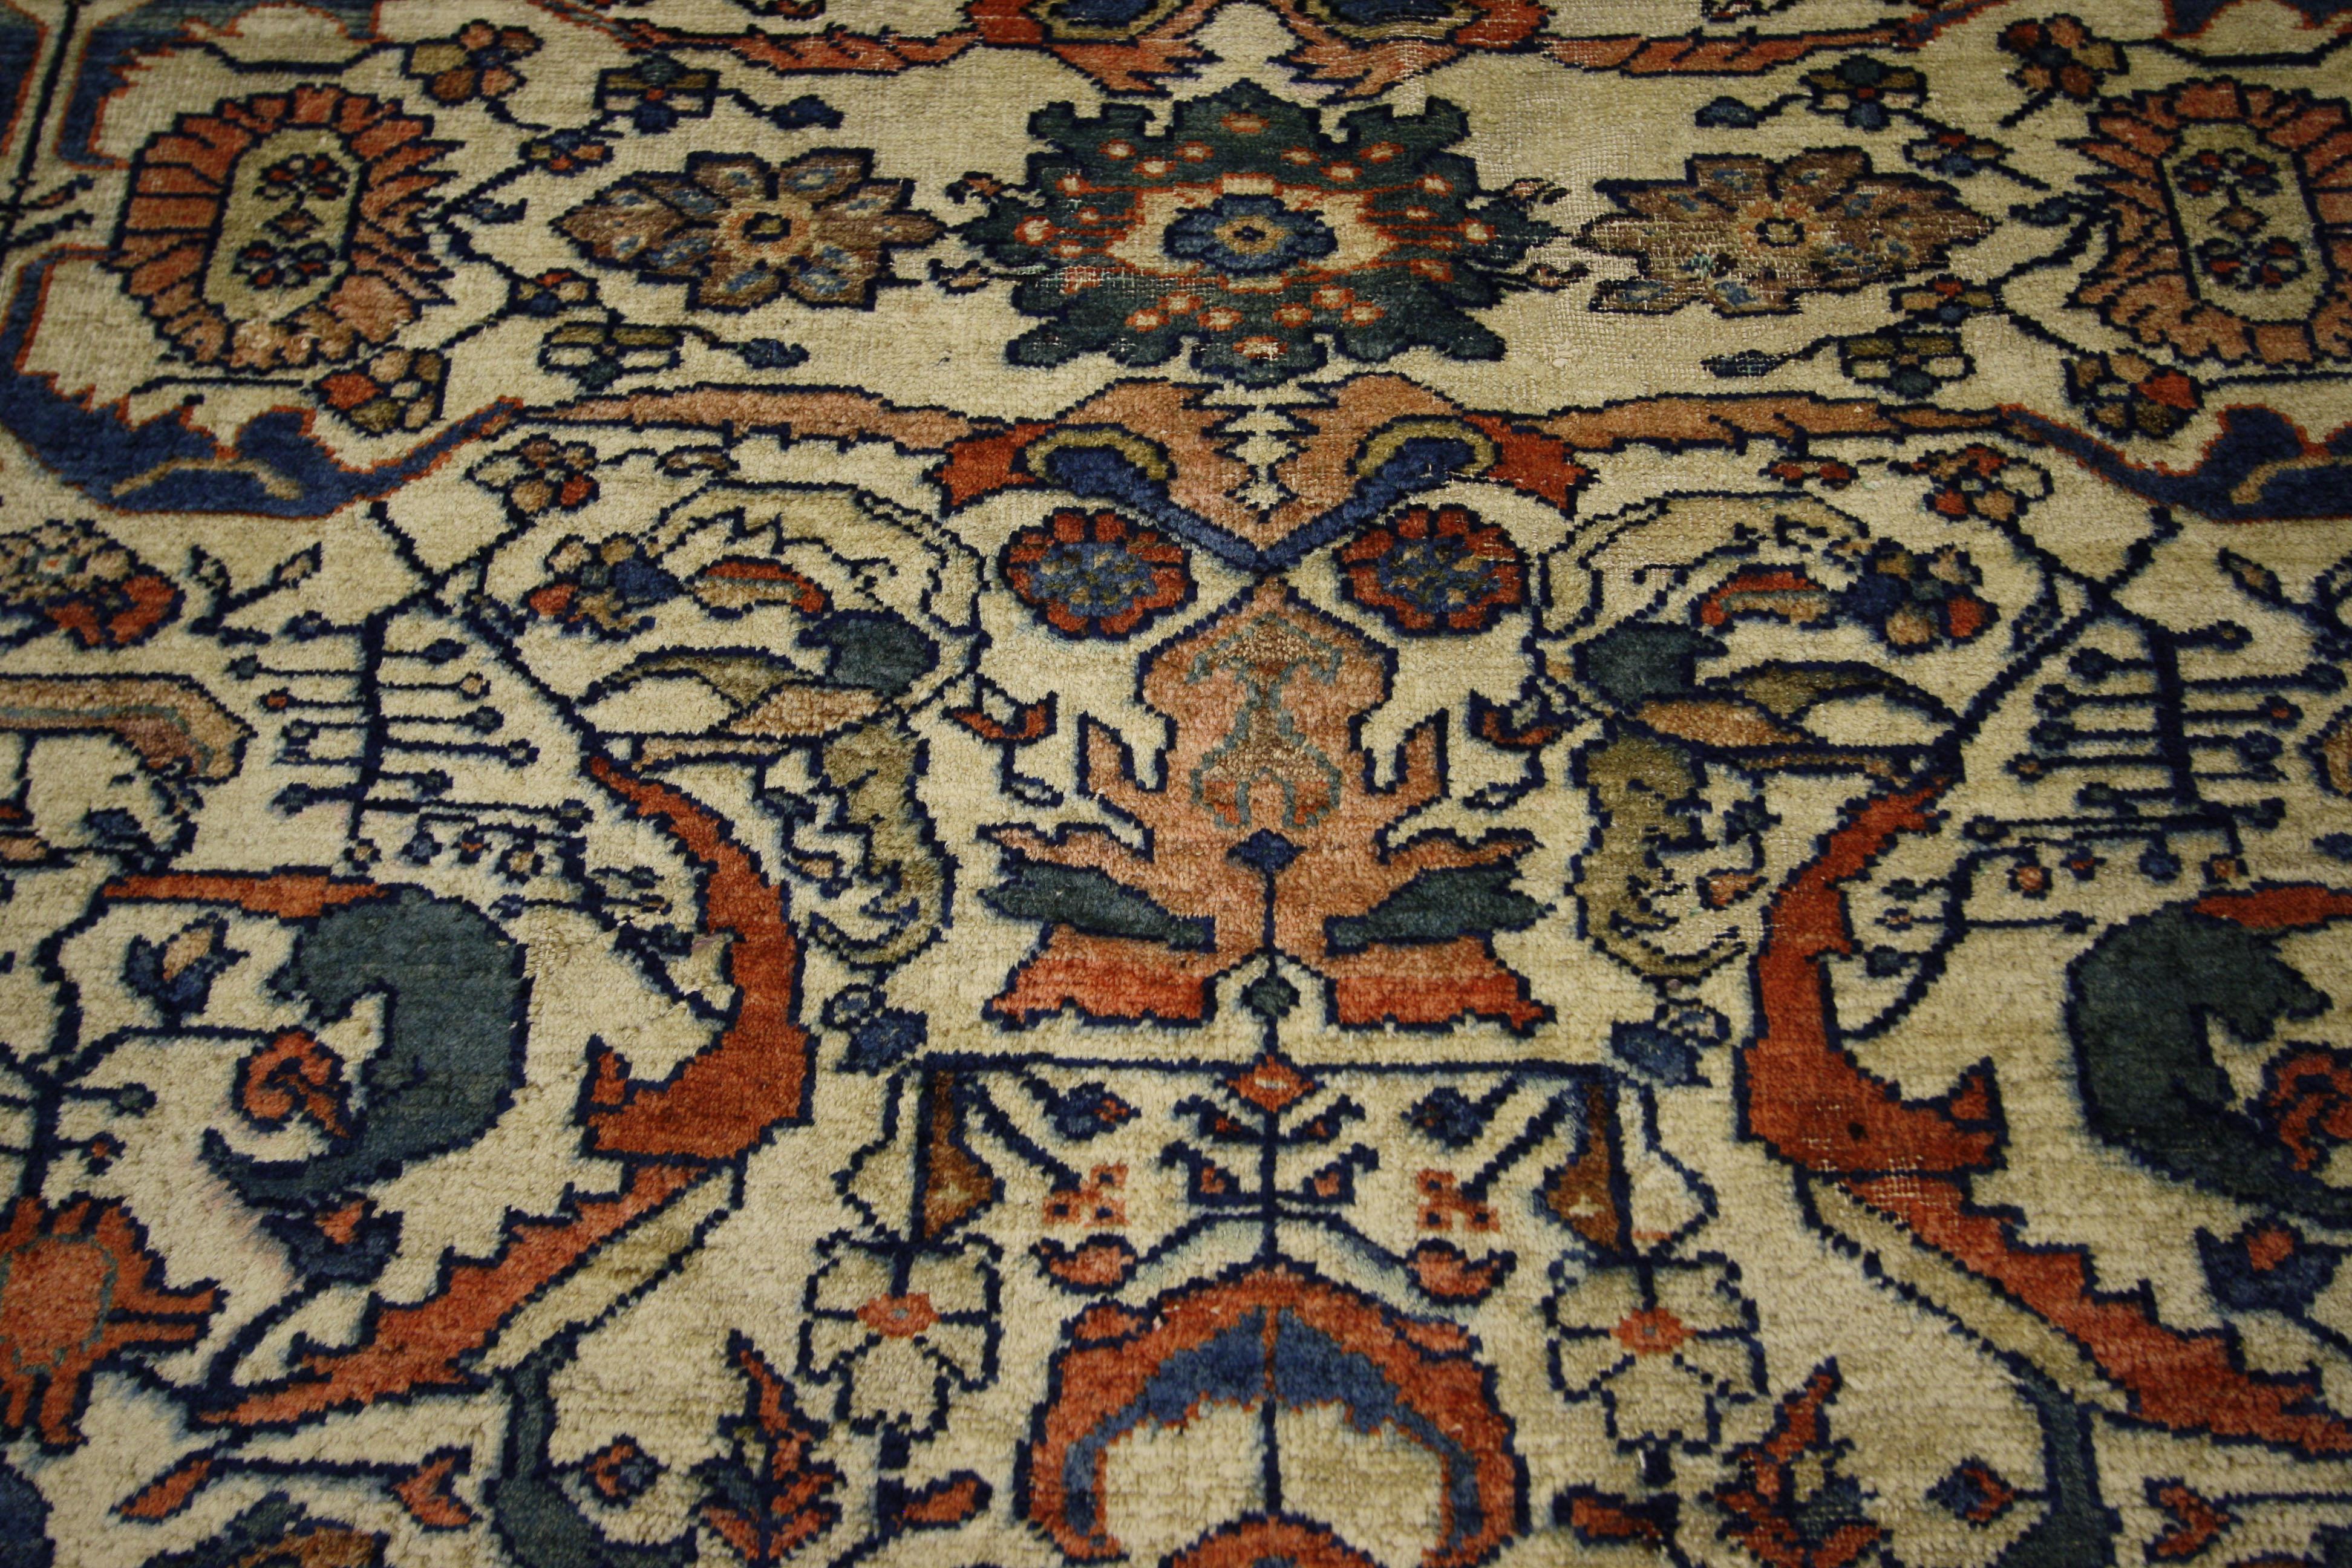 Hand-Knotted Antique Persian Lilihan Area Rug with Rustic Romantic Industrial Style